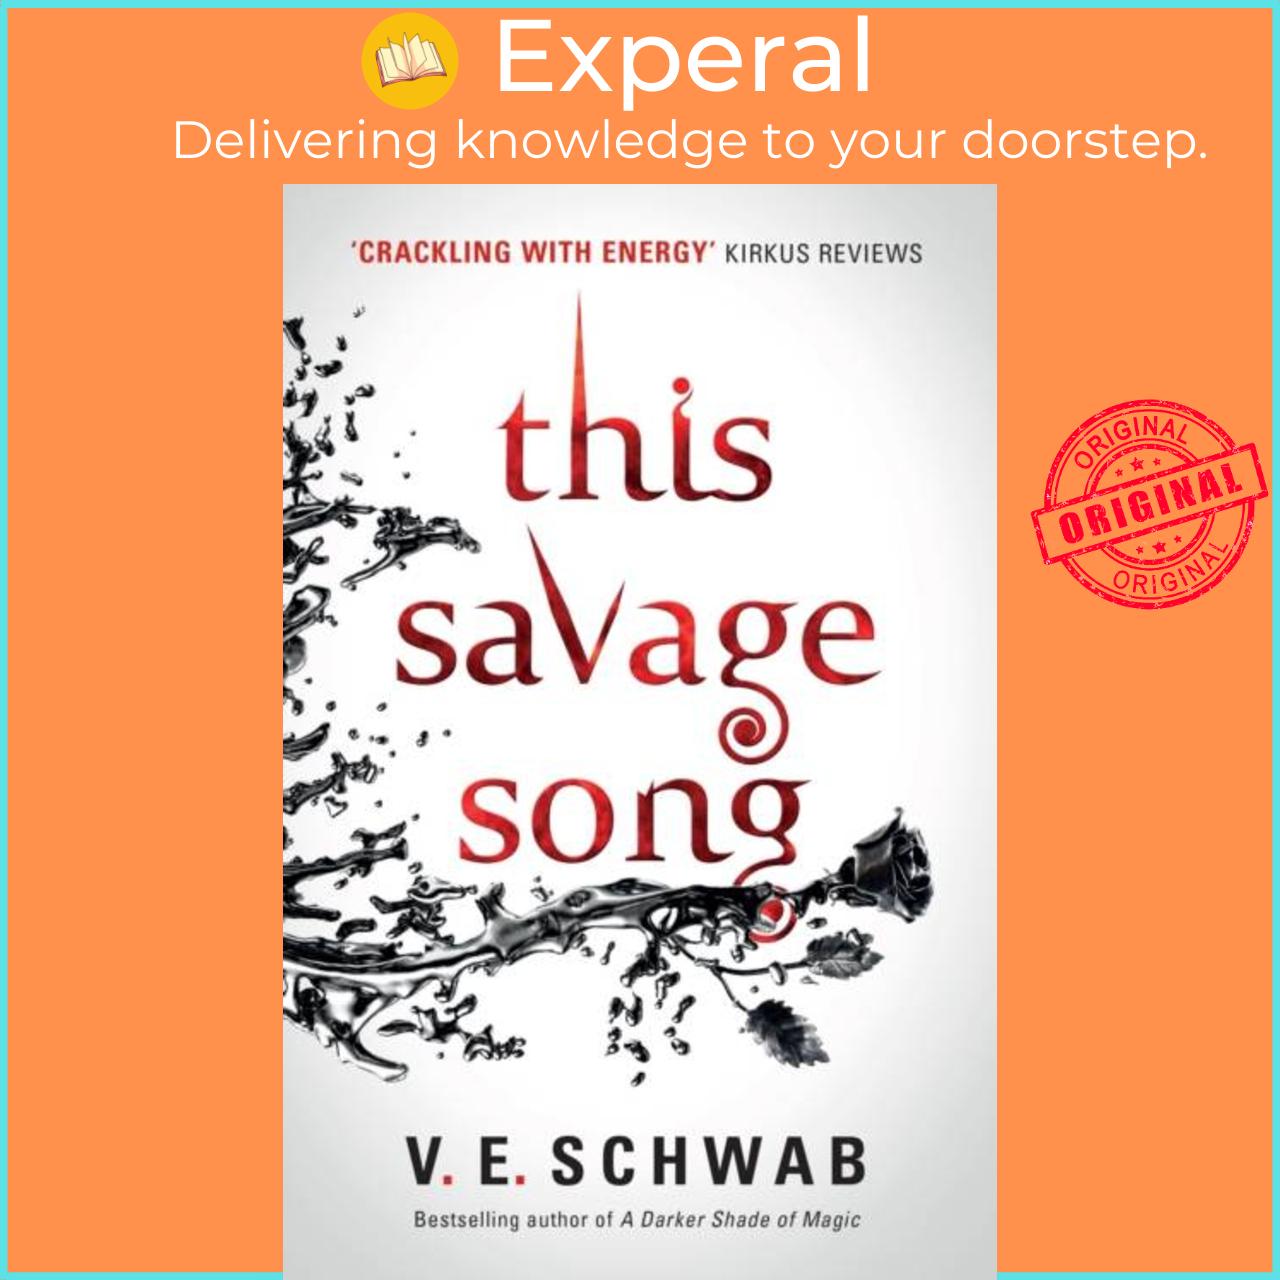 Sách - This Savage Song collectors hardback by V.E. Schwab (UK edition, hardcover)